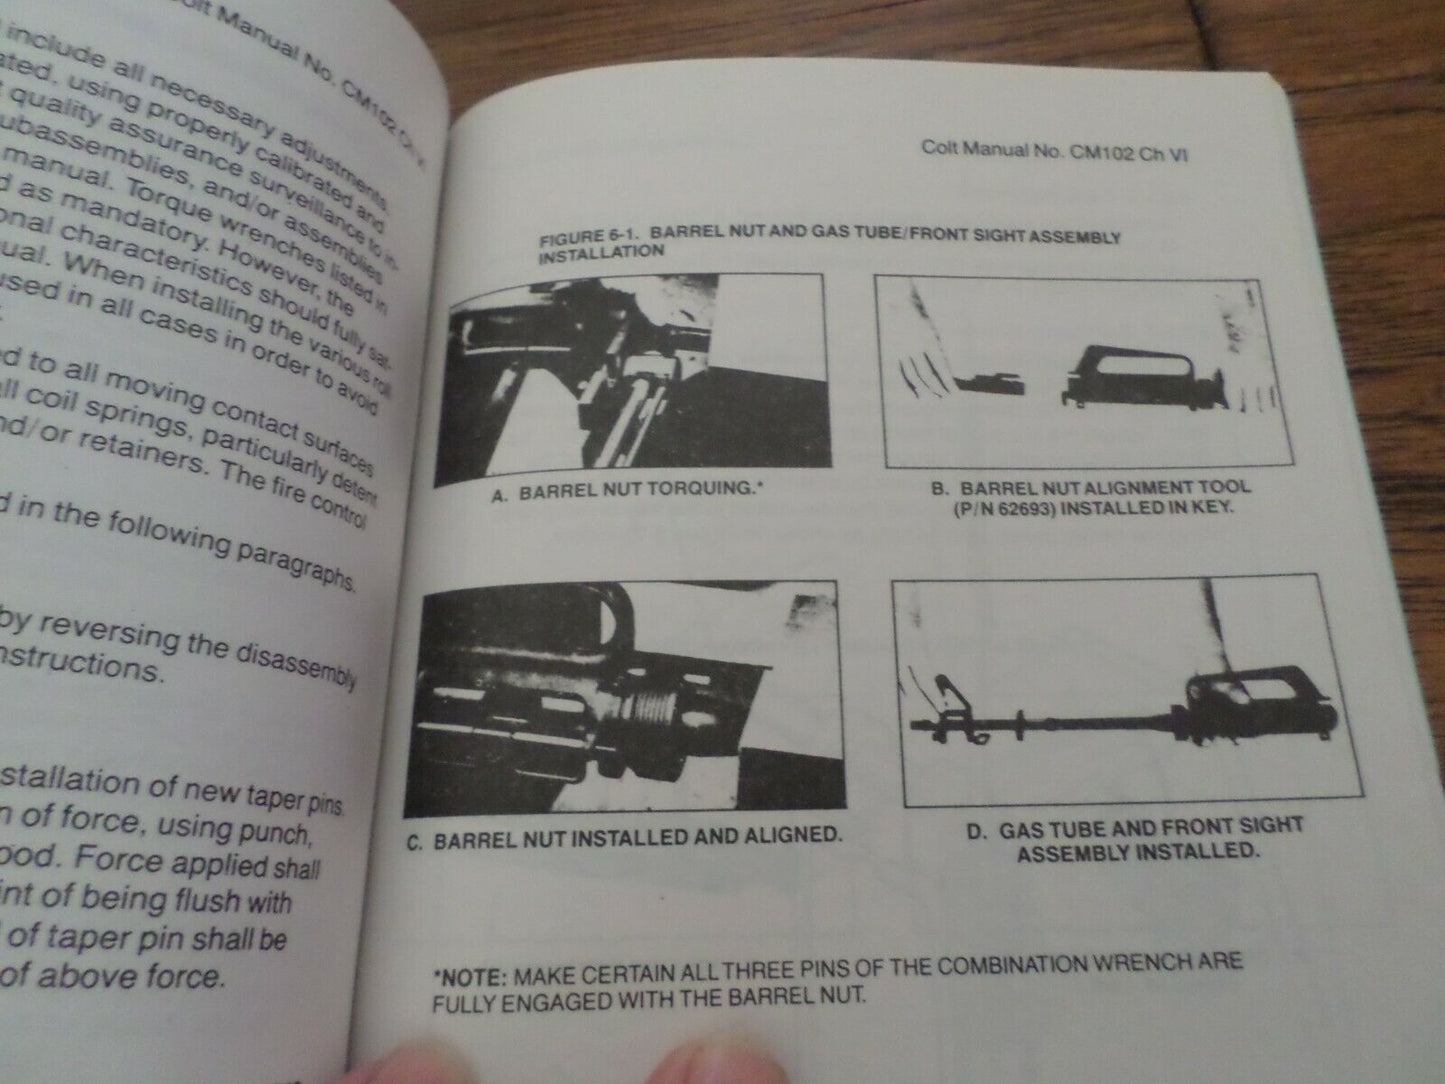 COLT M16A1 RIFLE MANUAL MAINTENANCE & REPAIR TROUBLE SHOOTING ILLUSTRATED BOOK